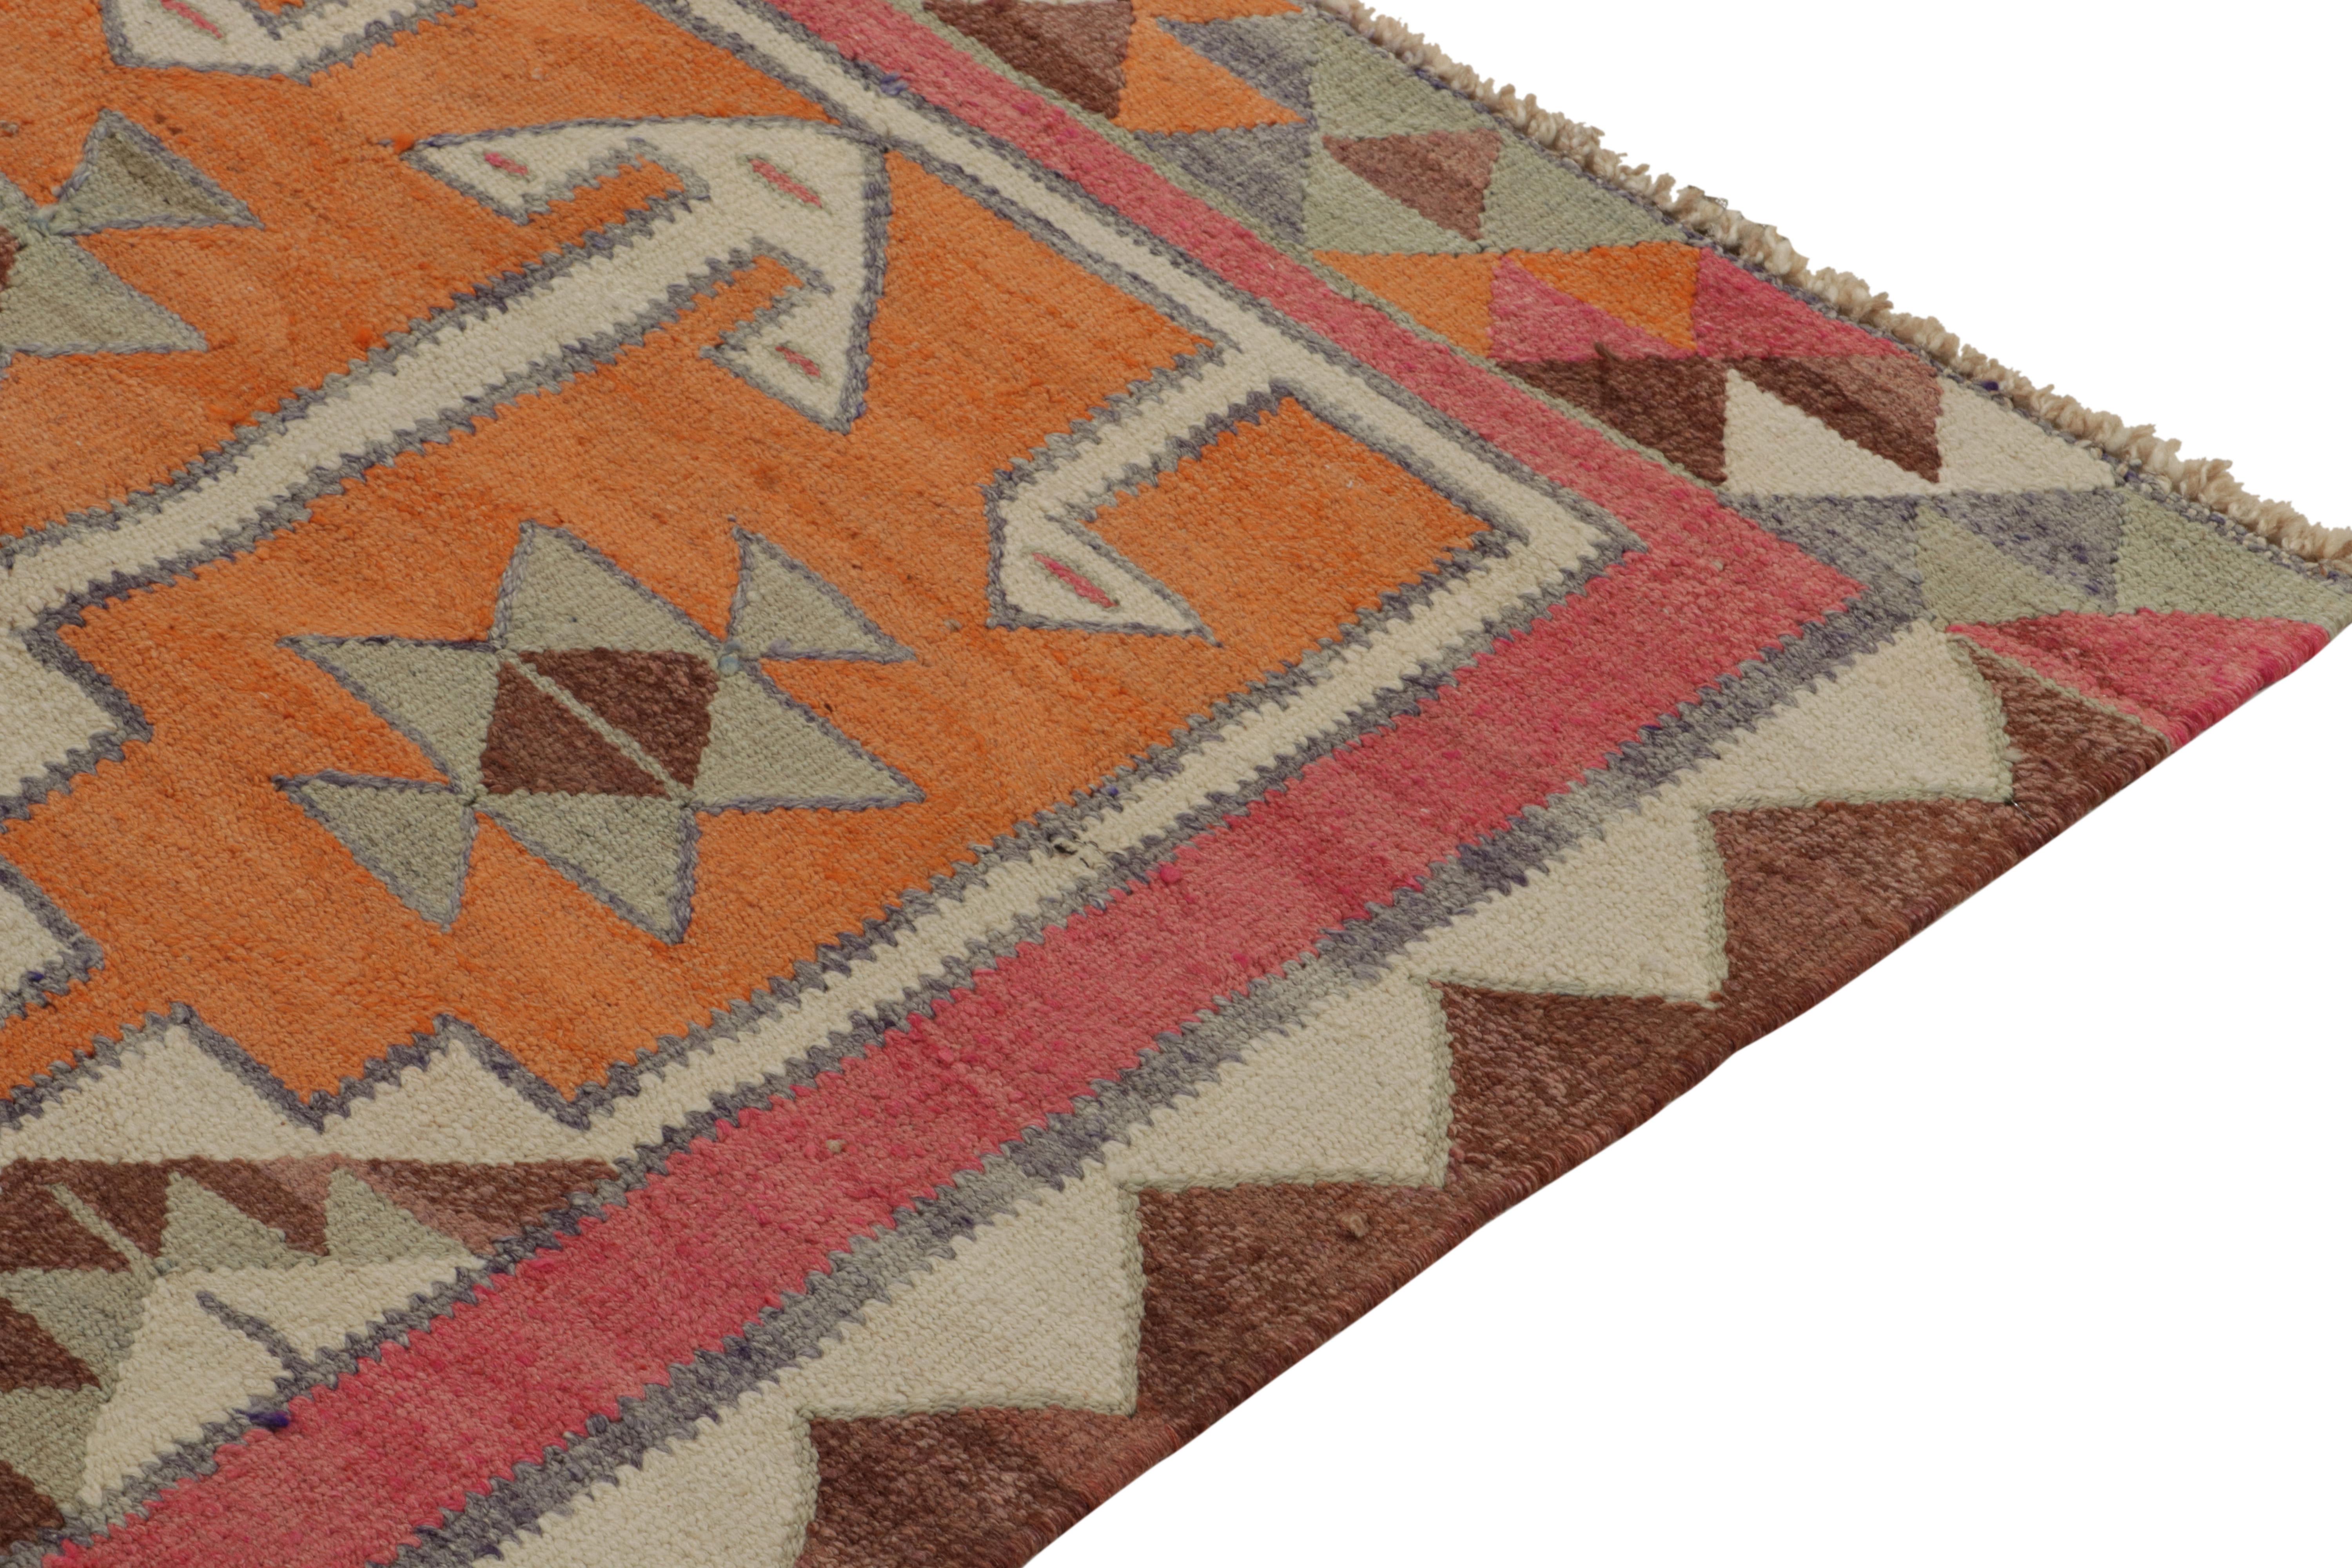 Vintage Kilim Tribal Runner in Red, Orange Geometric Pattern by Rug & Kilim In Good Condition For Sale In Long Island City, NY